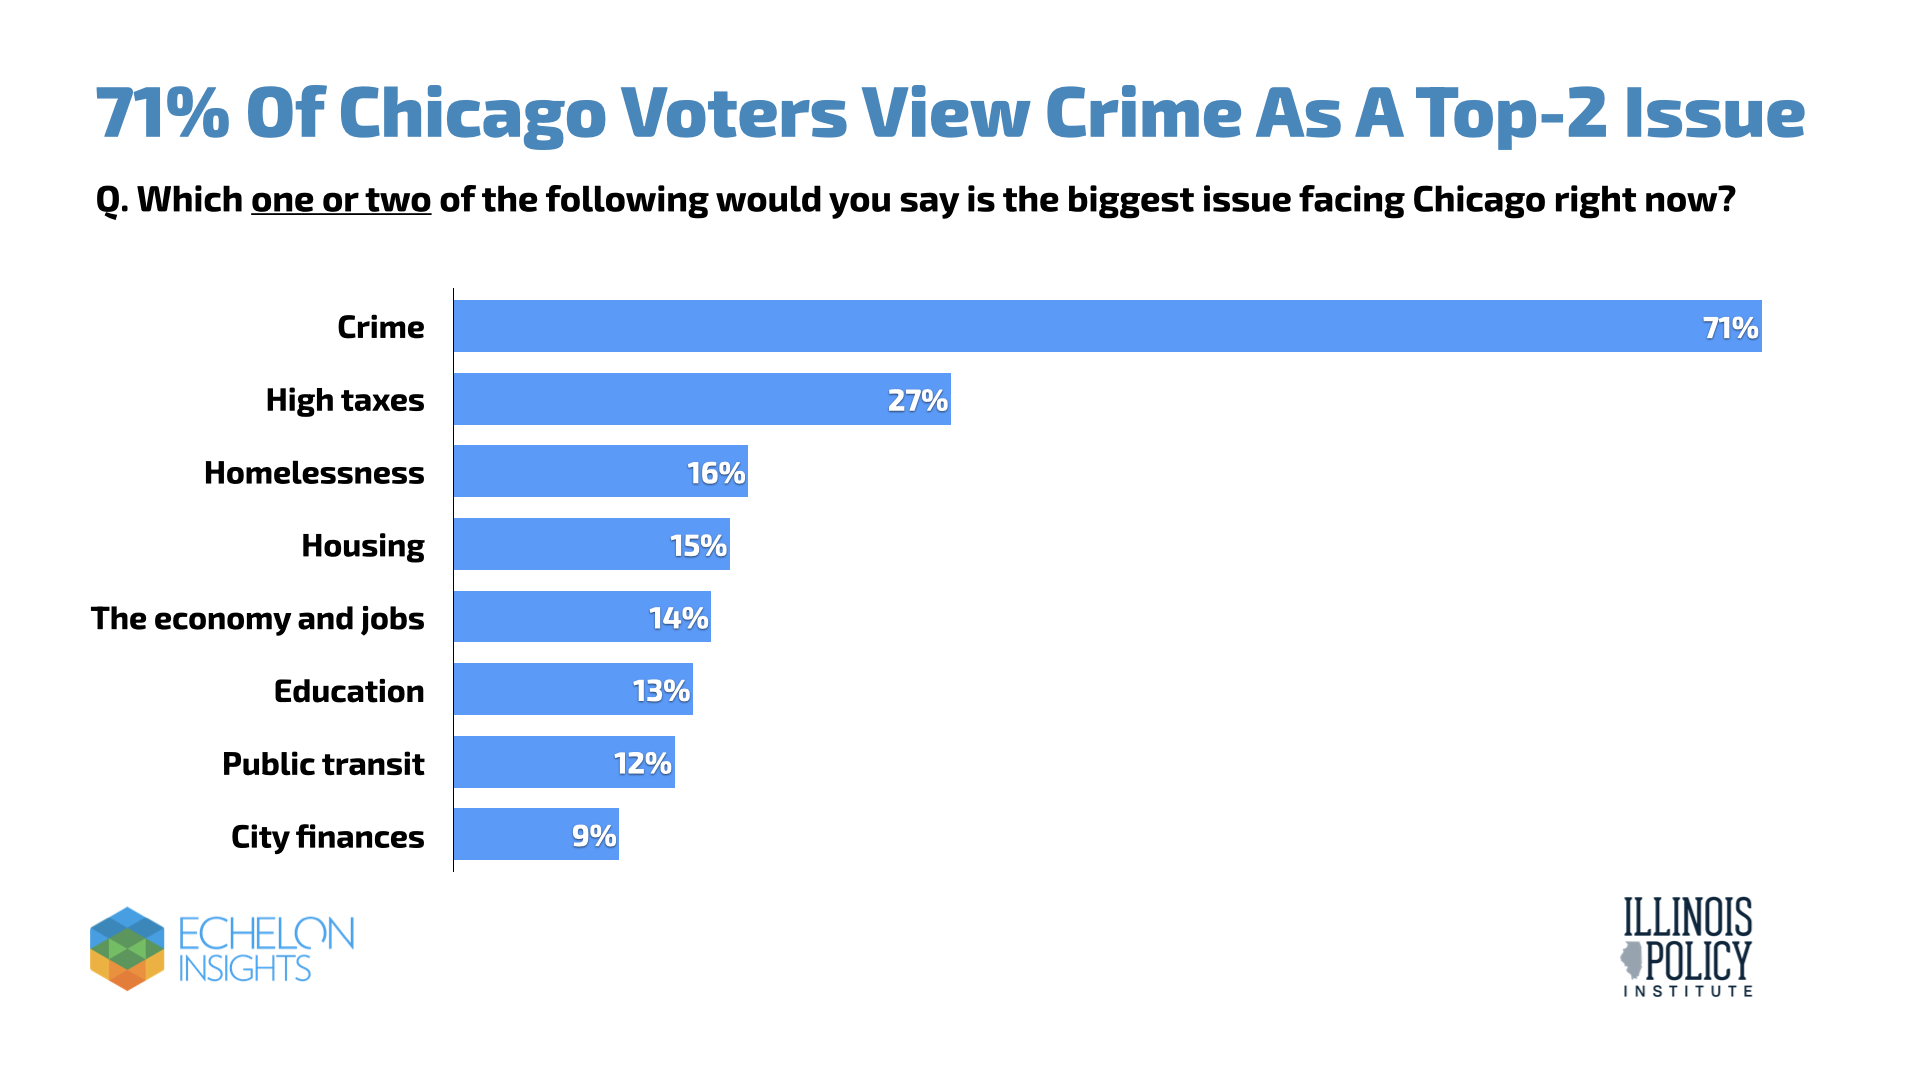 71% of Chicago voters view crime as a top-2 issue